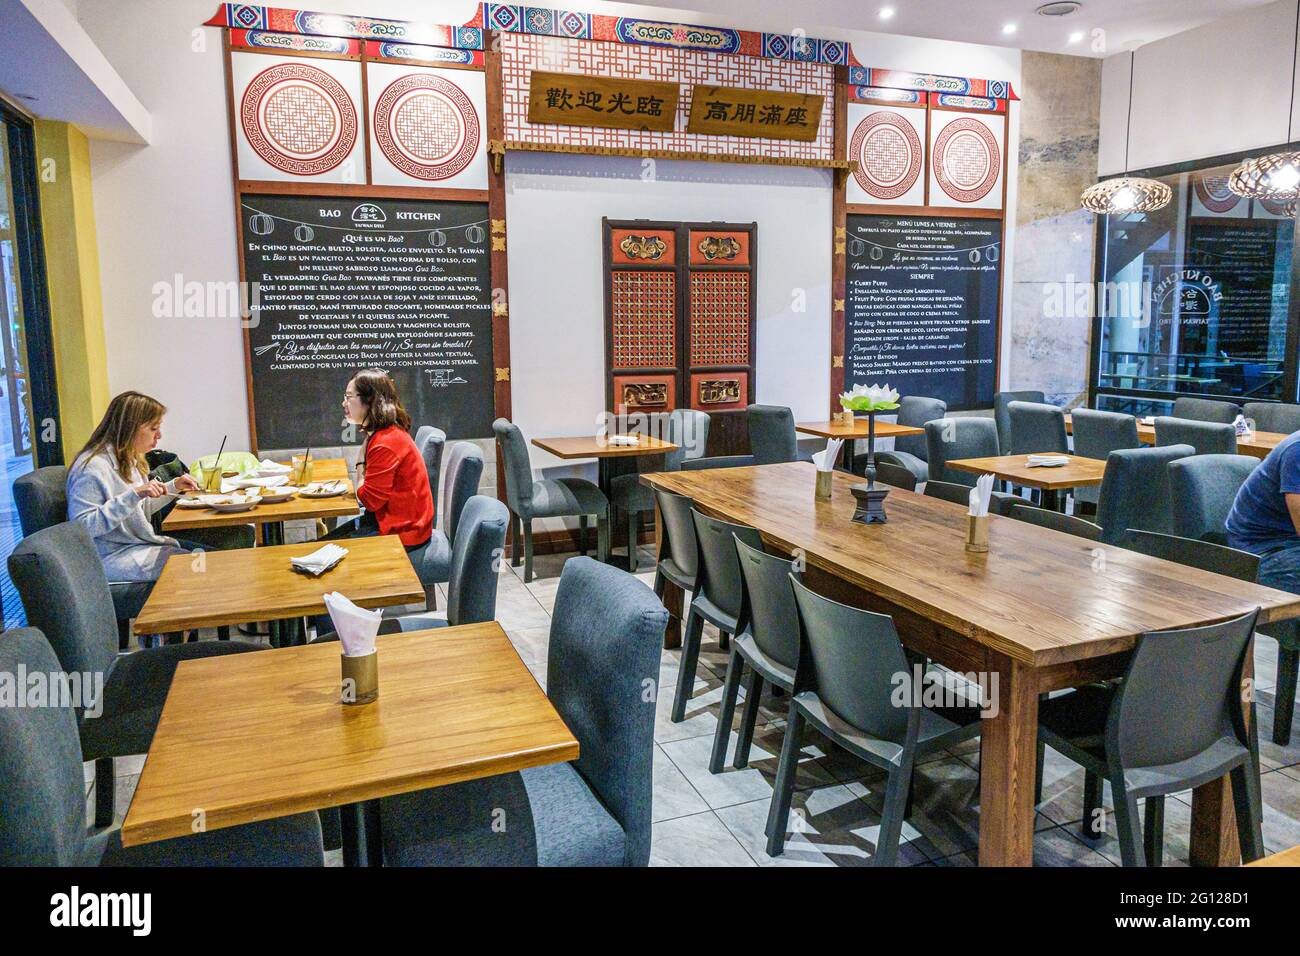 Argentina Buenos Aires Bao Kitchen Taiwan Bistro Asian Asians ethnic cuisine restaurant empty tables customer eating Stock Photo